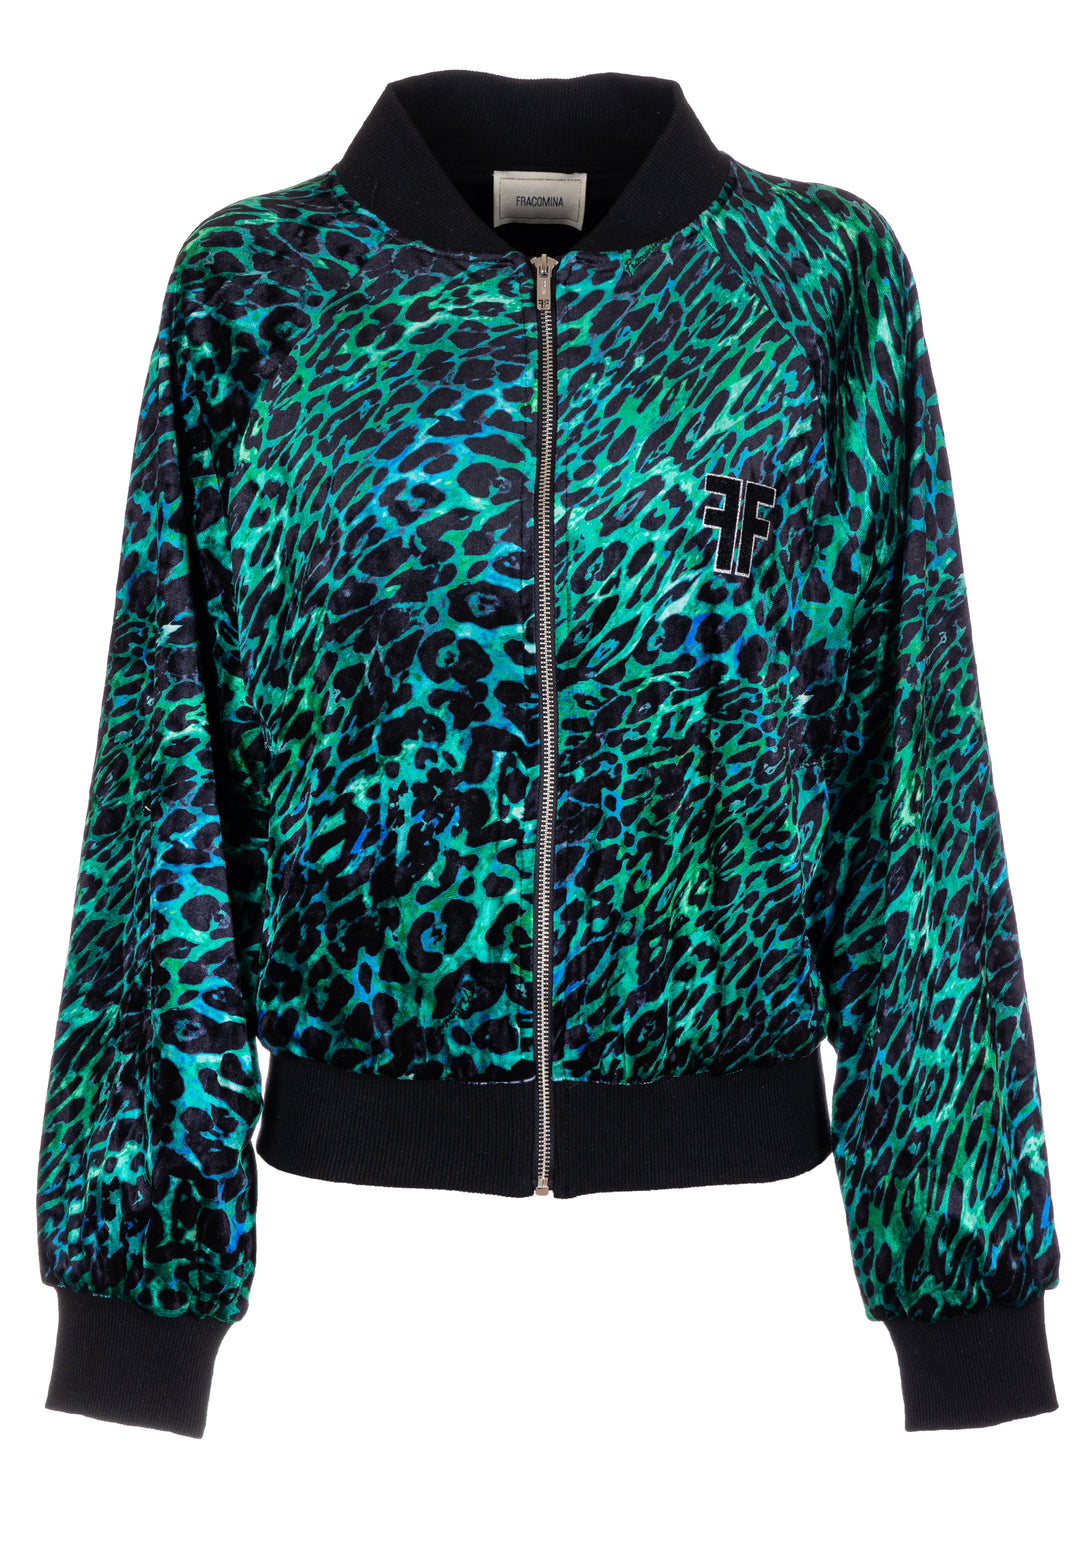 Sweater regular fit bomber style with animalier pattern